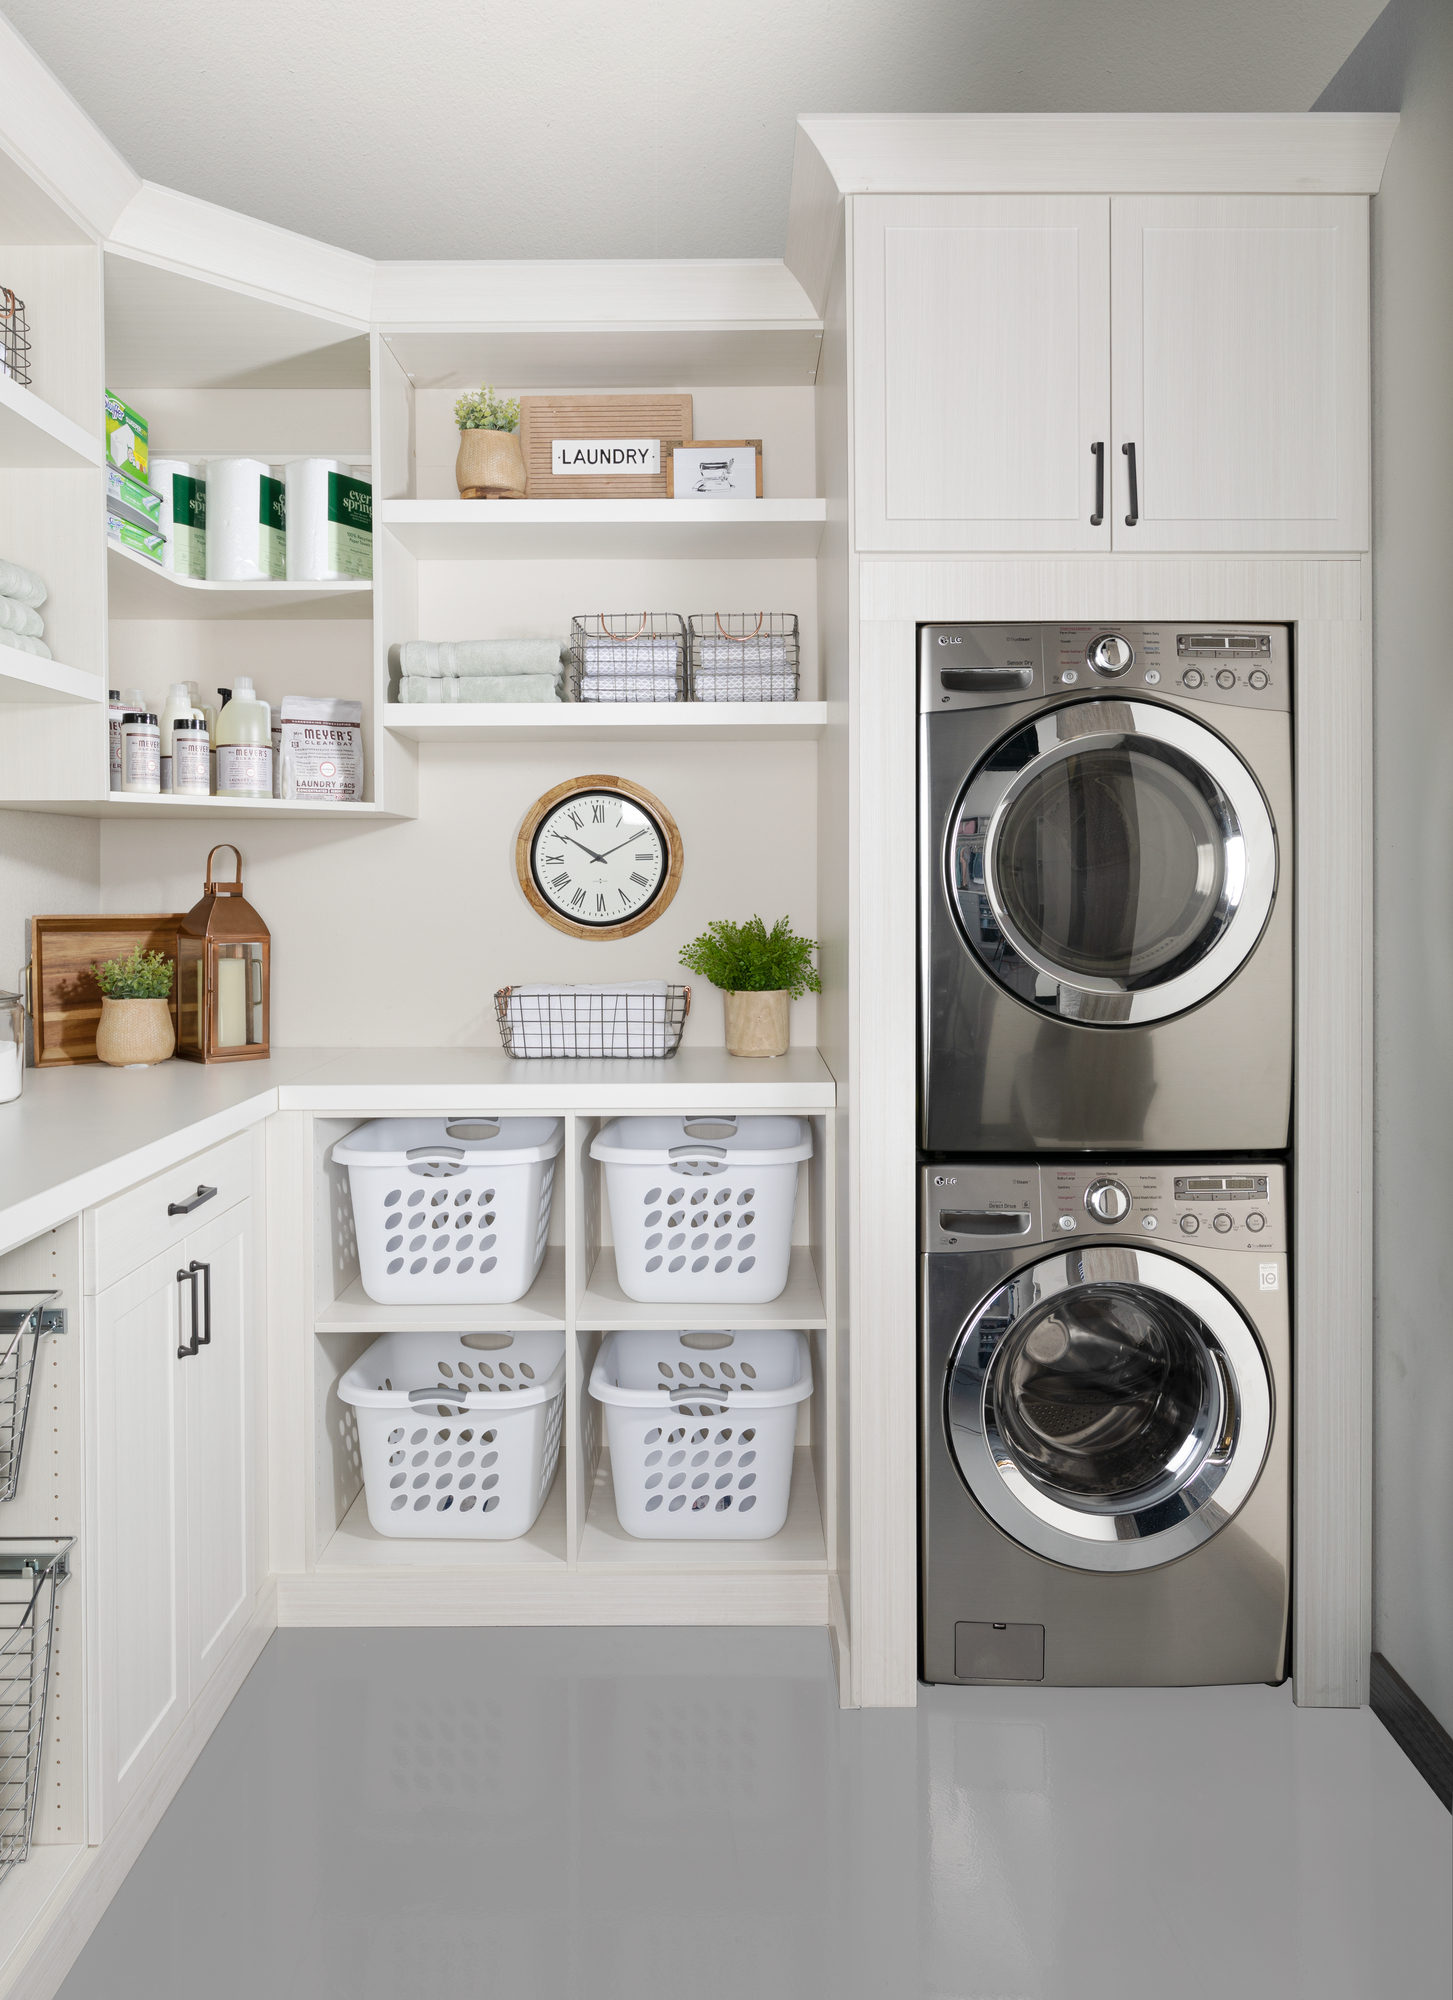 Custom floor mounted boutique laundry room storage with shelving and hampers